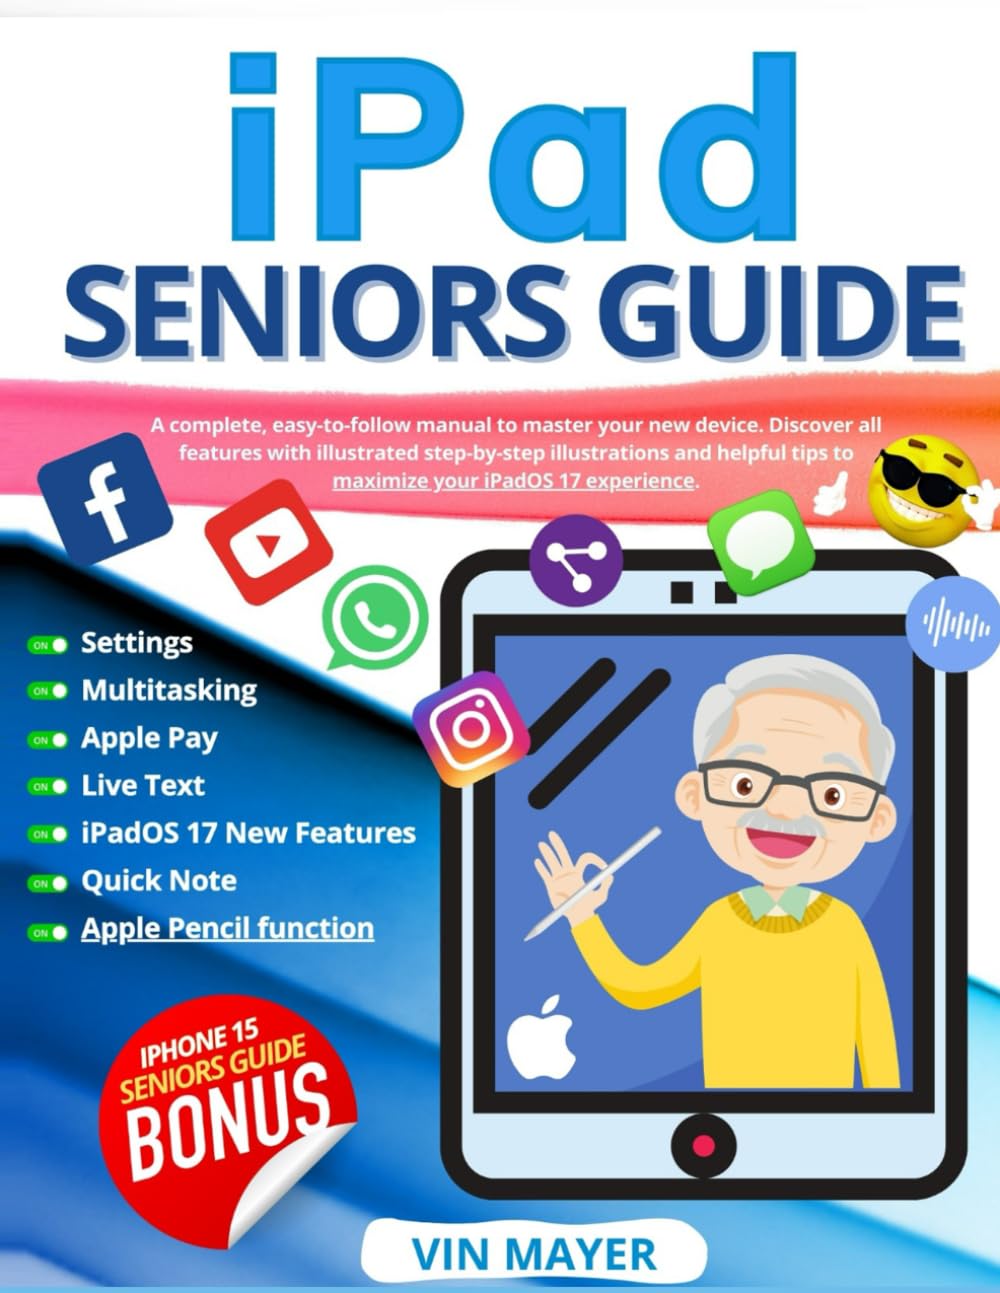 iPad Seniors Guide: A Complete, Easy-to-Follow Manual to Master Your New Device. Discover All Features with Illustrated Step-by-Step Instructions and Helpful Tips to Maximize Your iPadOS 17 Experience